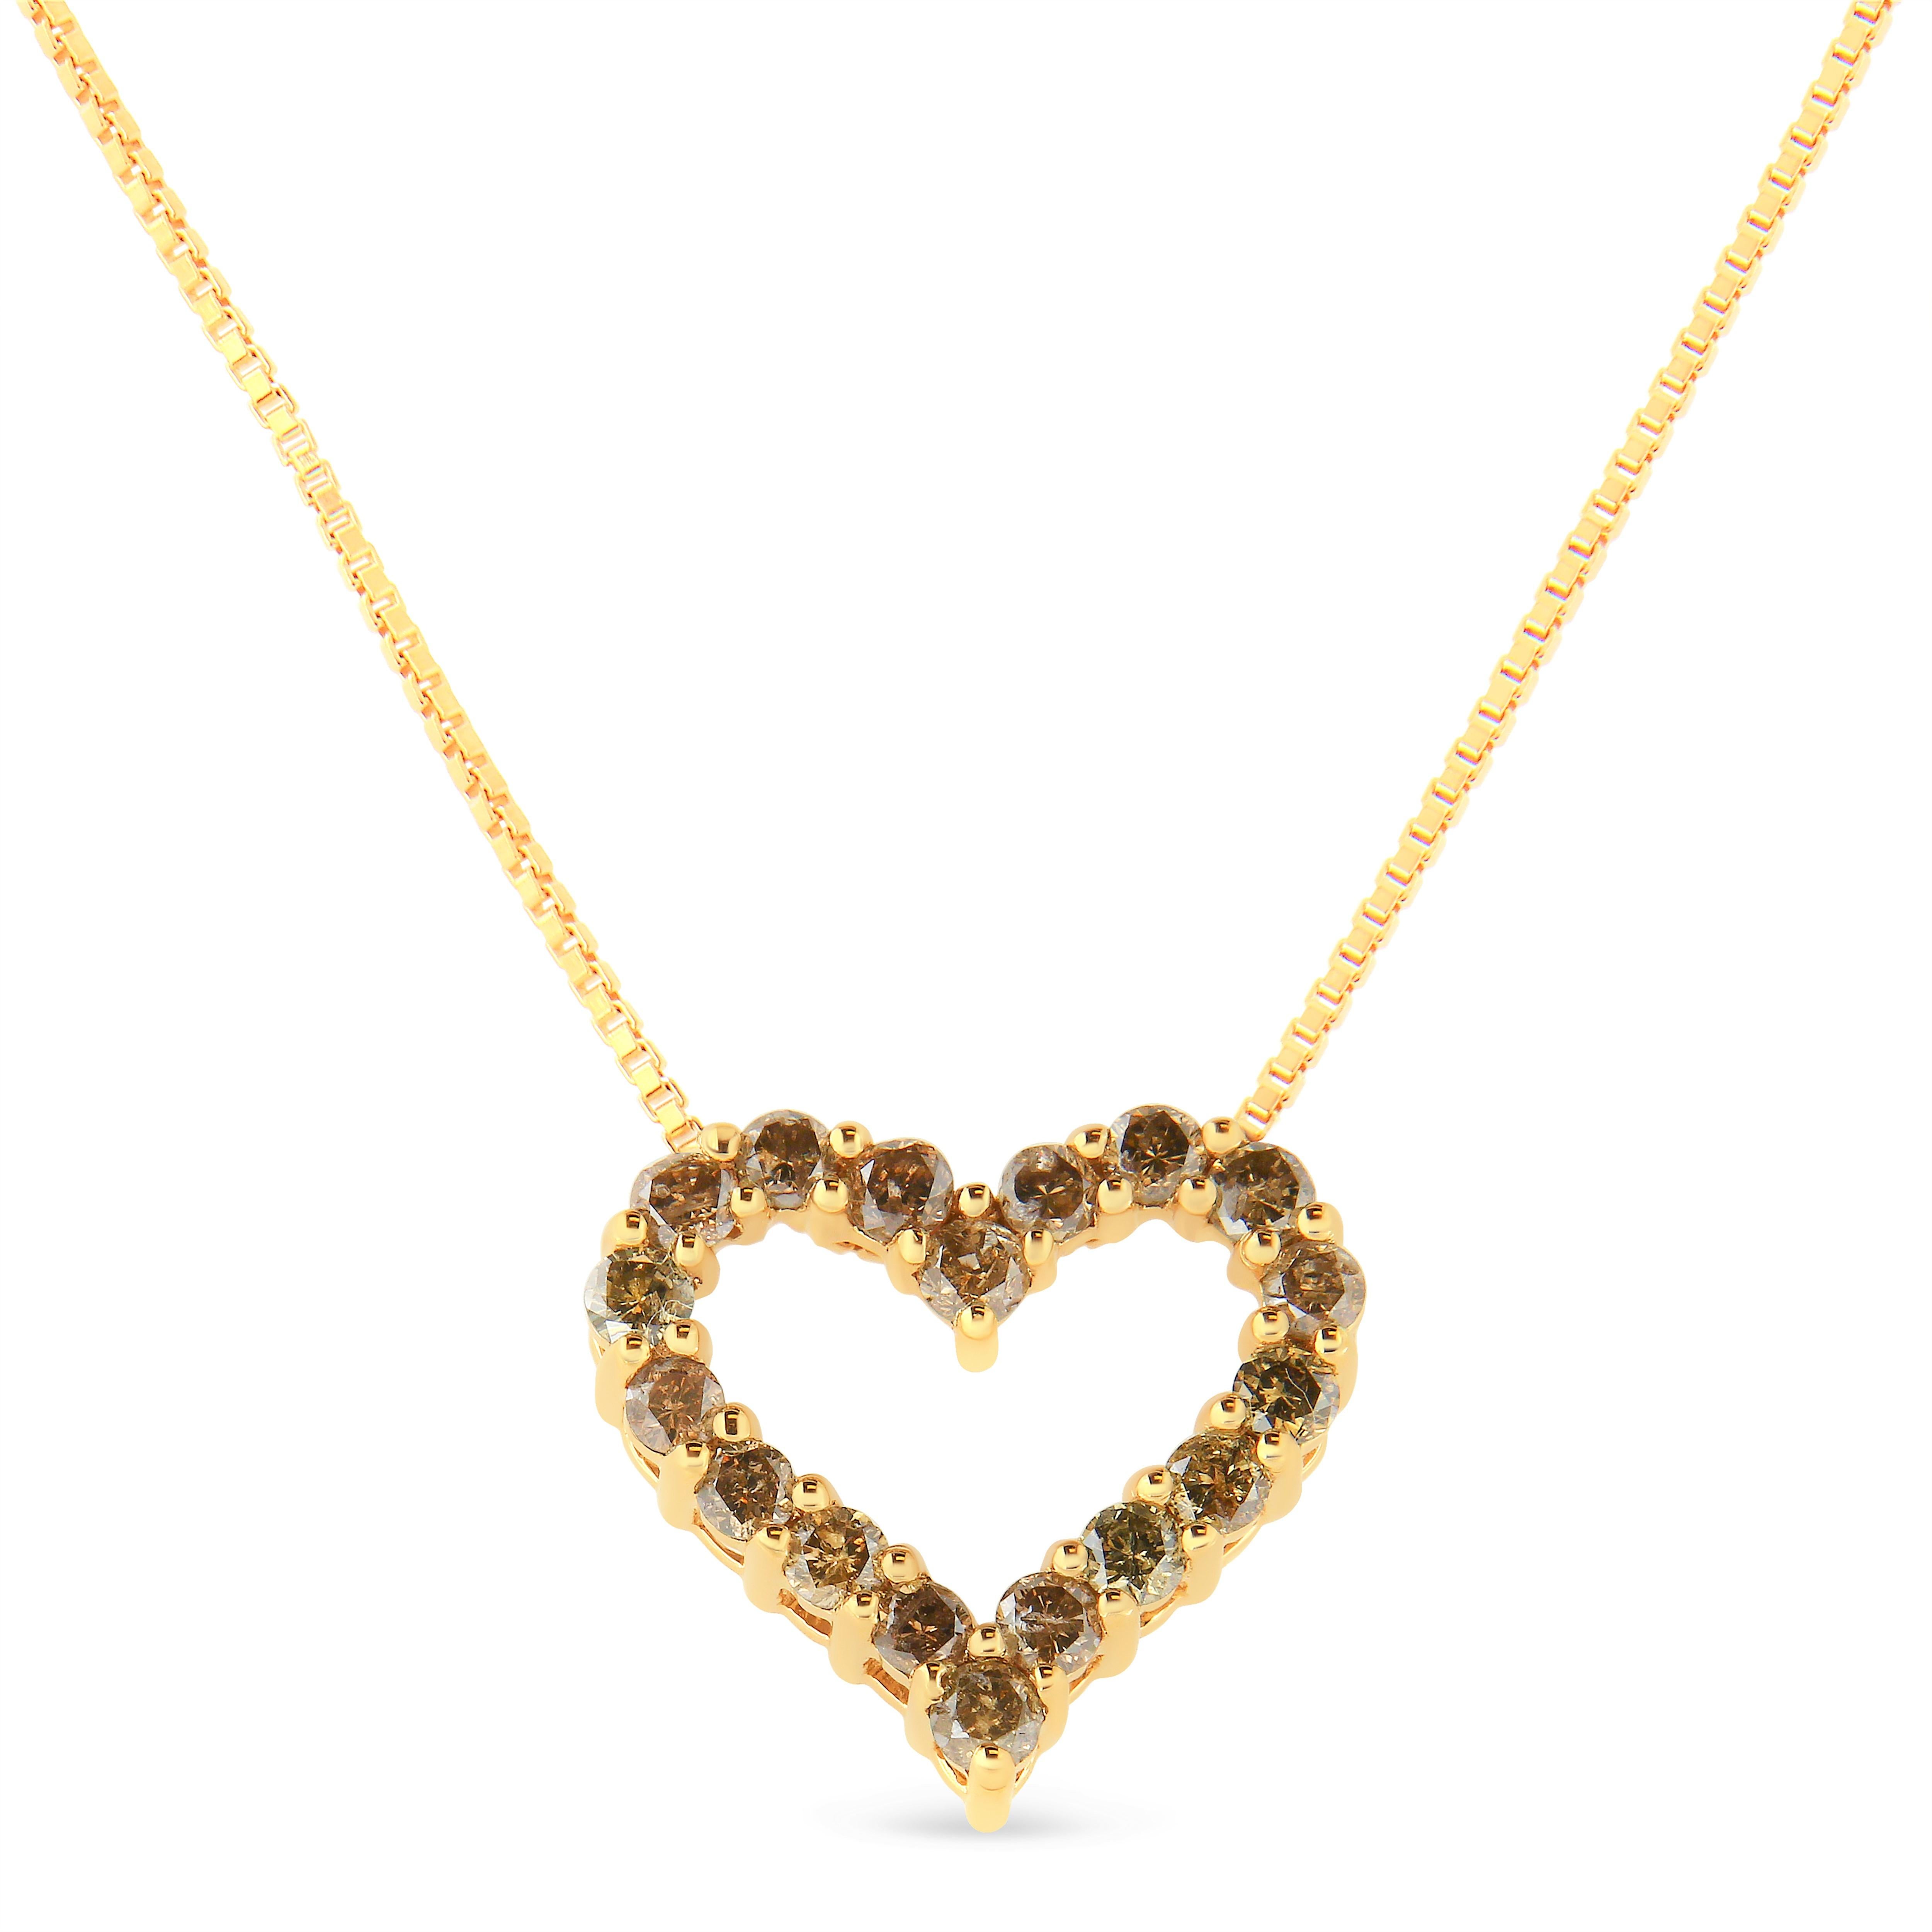 Adorn yourself with this lovely 14kt yellow gold plated 925 sterling silver heart pendant necklace. This elegant necklace is embellished with 18 round cut champagne color diamonds in classic shared prong settings. The pendant features a total